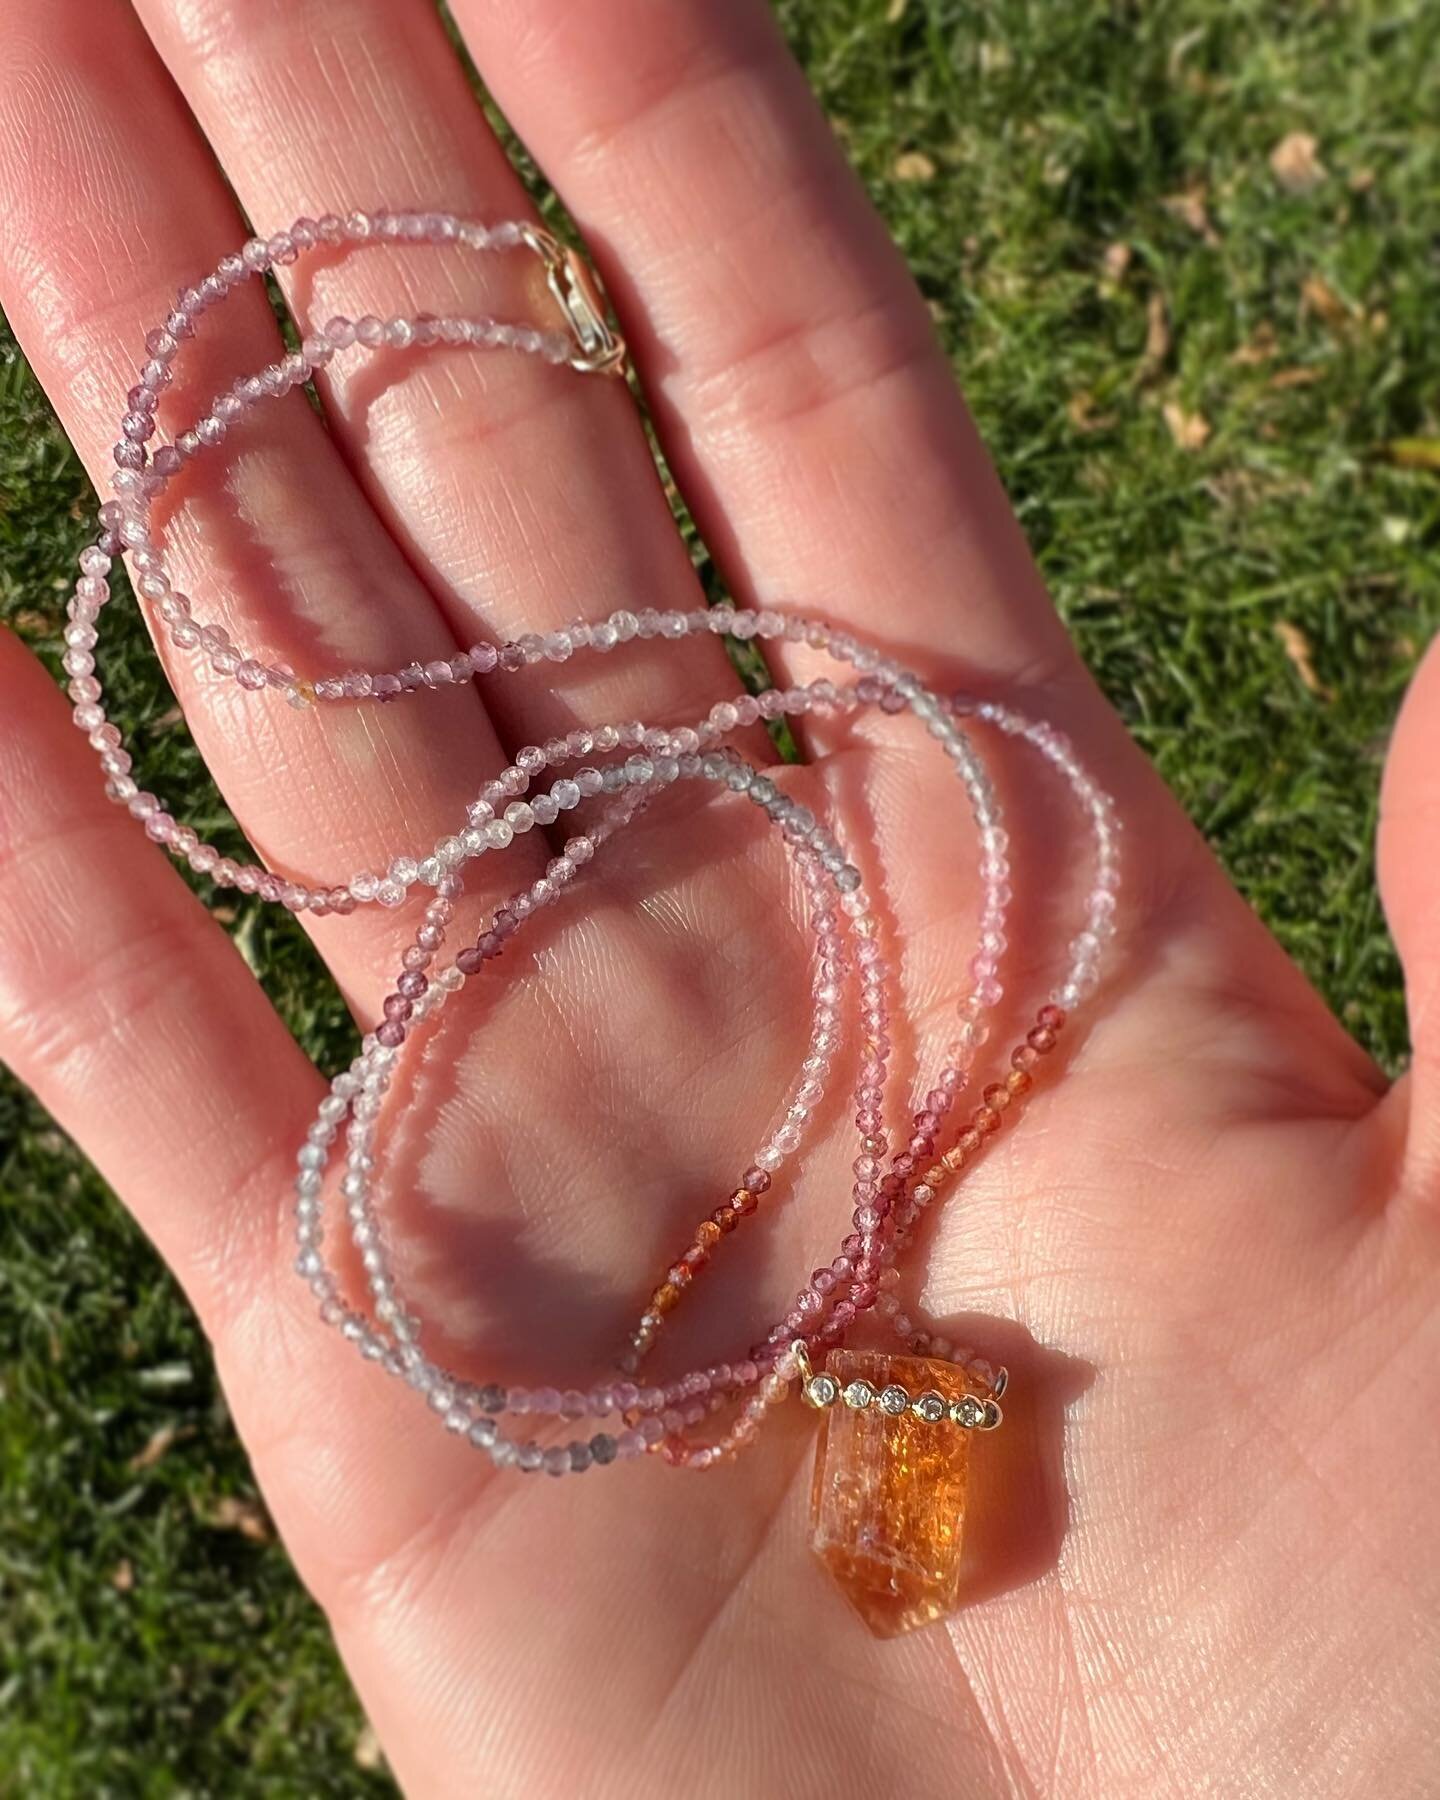 Love this Imperial Topaz and Spinel combo! 🧡